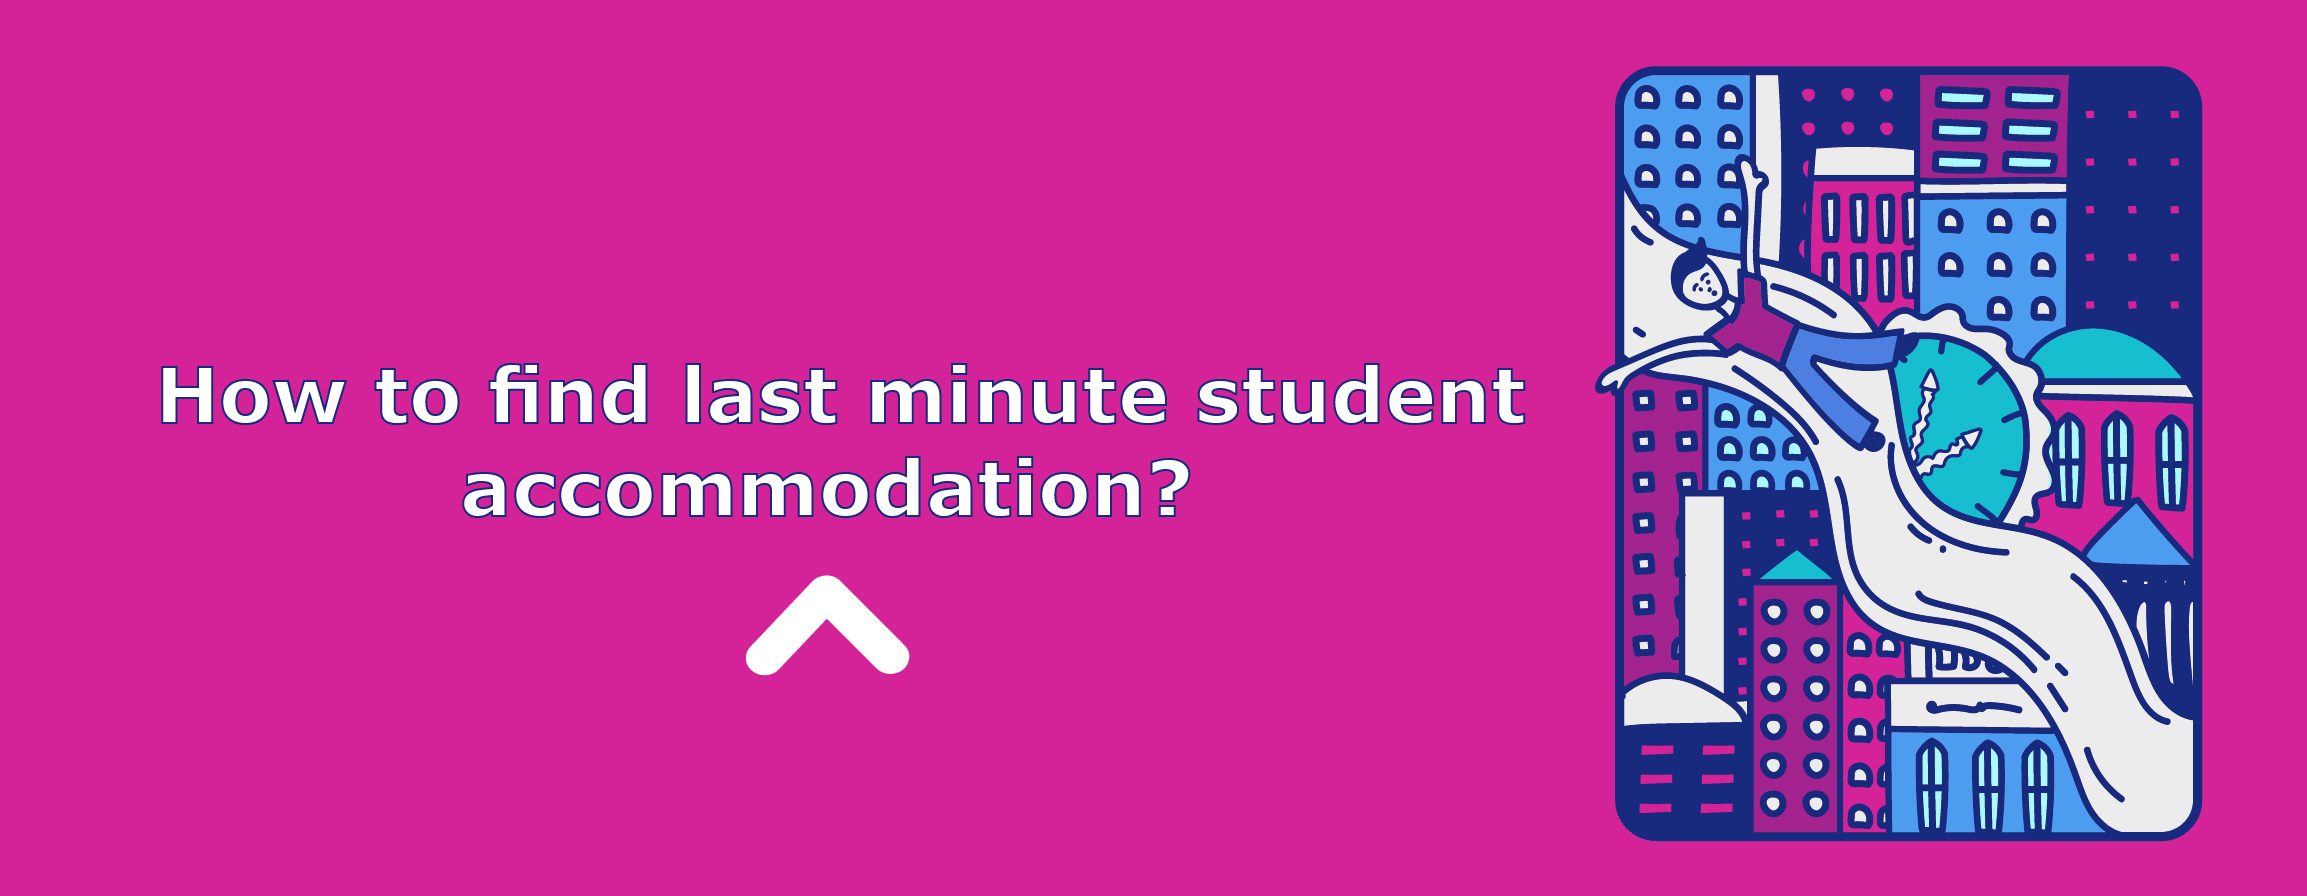 How to Find Last Minute Student Accommodation